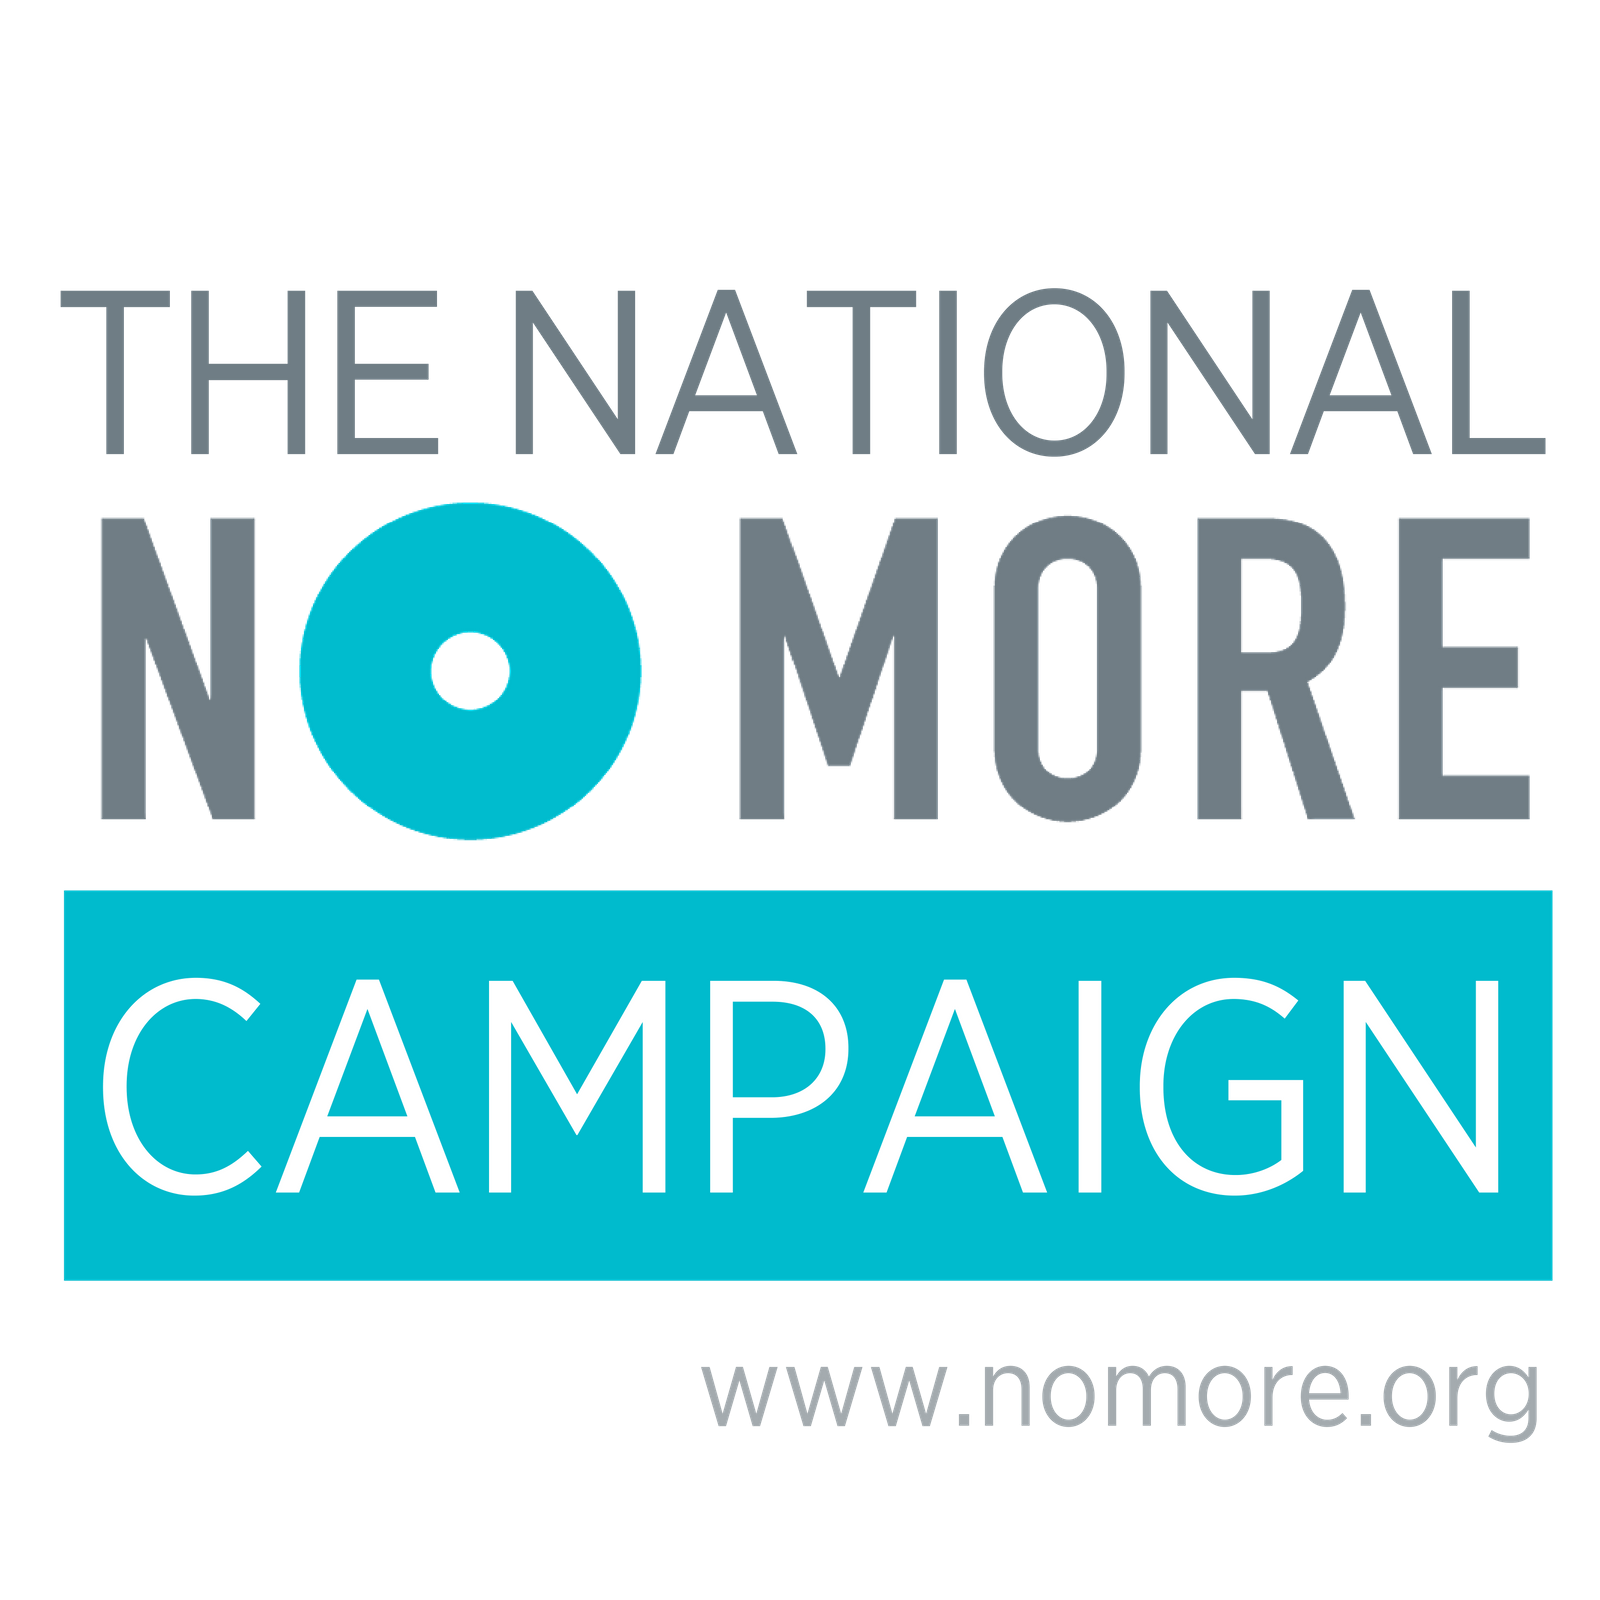 The National NO MORE Campaign